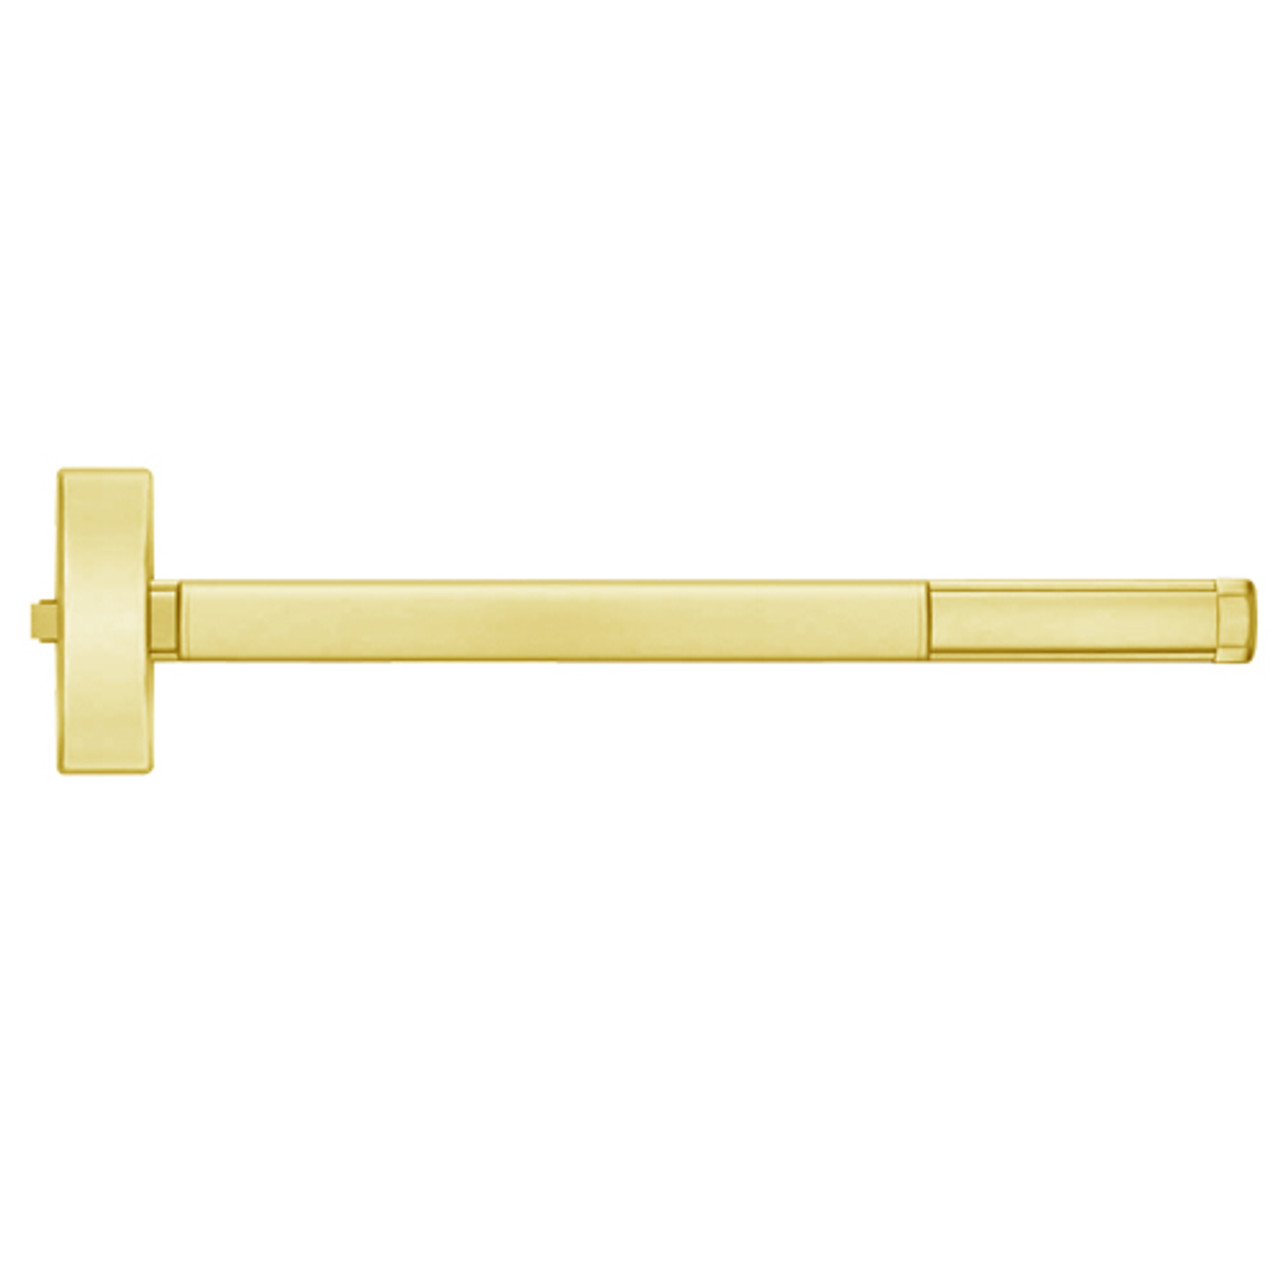 MLRFL2114-605-36 PHI 2100 Series Fire Rated Apex Rim Exit Device with Motorized Latch Retraction Prepped for Lever-Knob Always Active in Bright Brass Finish